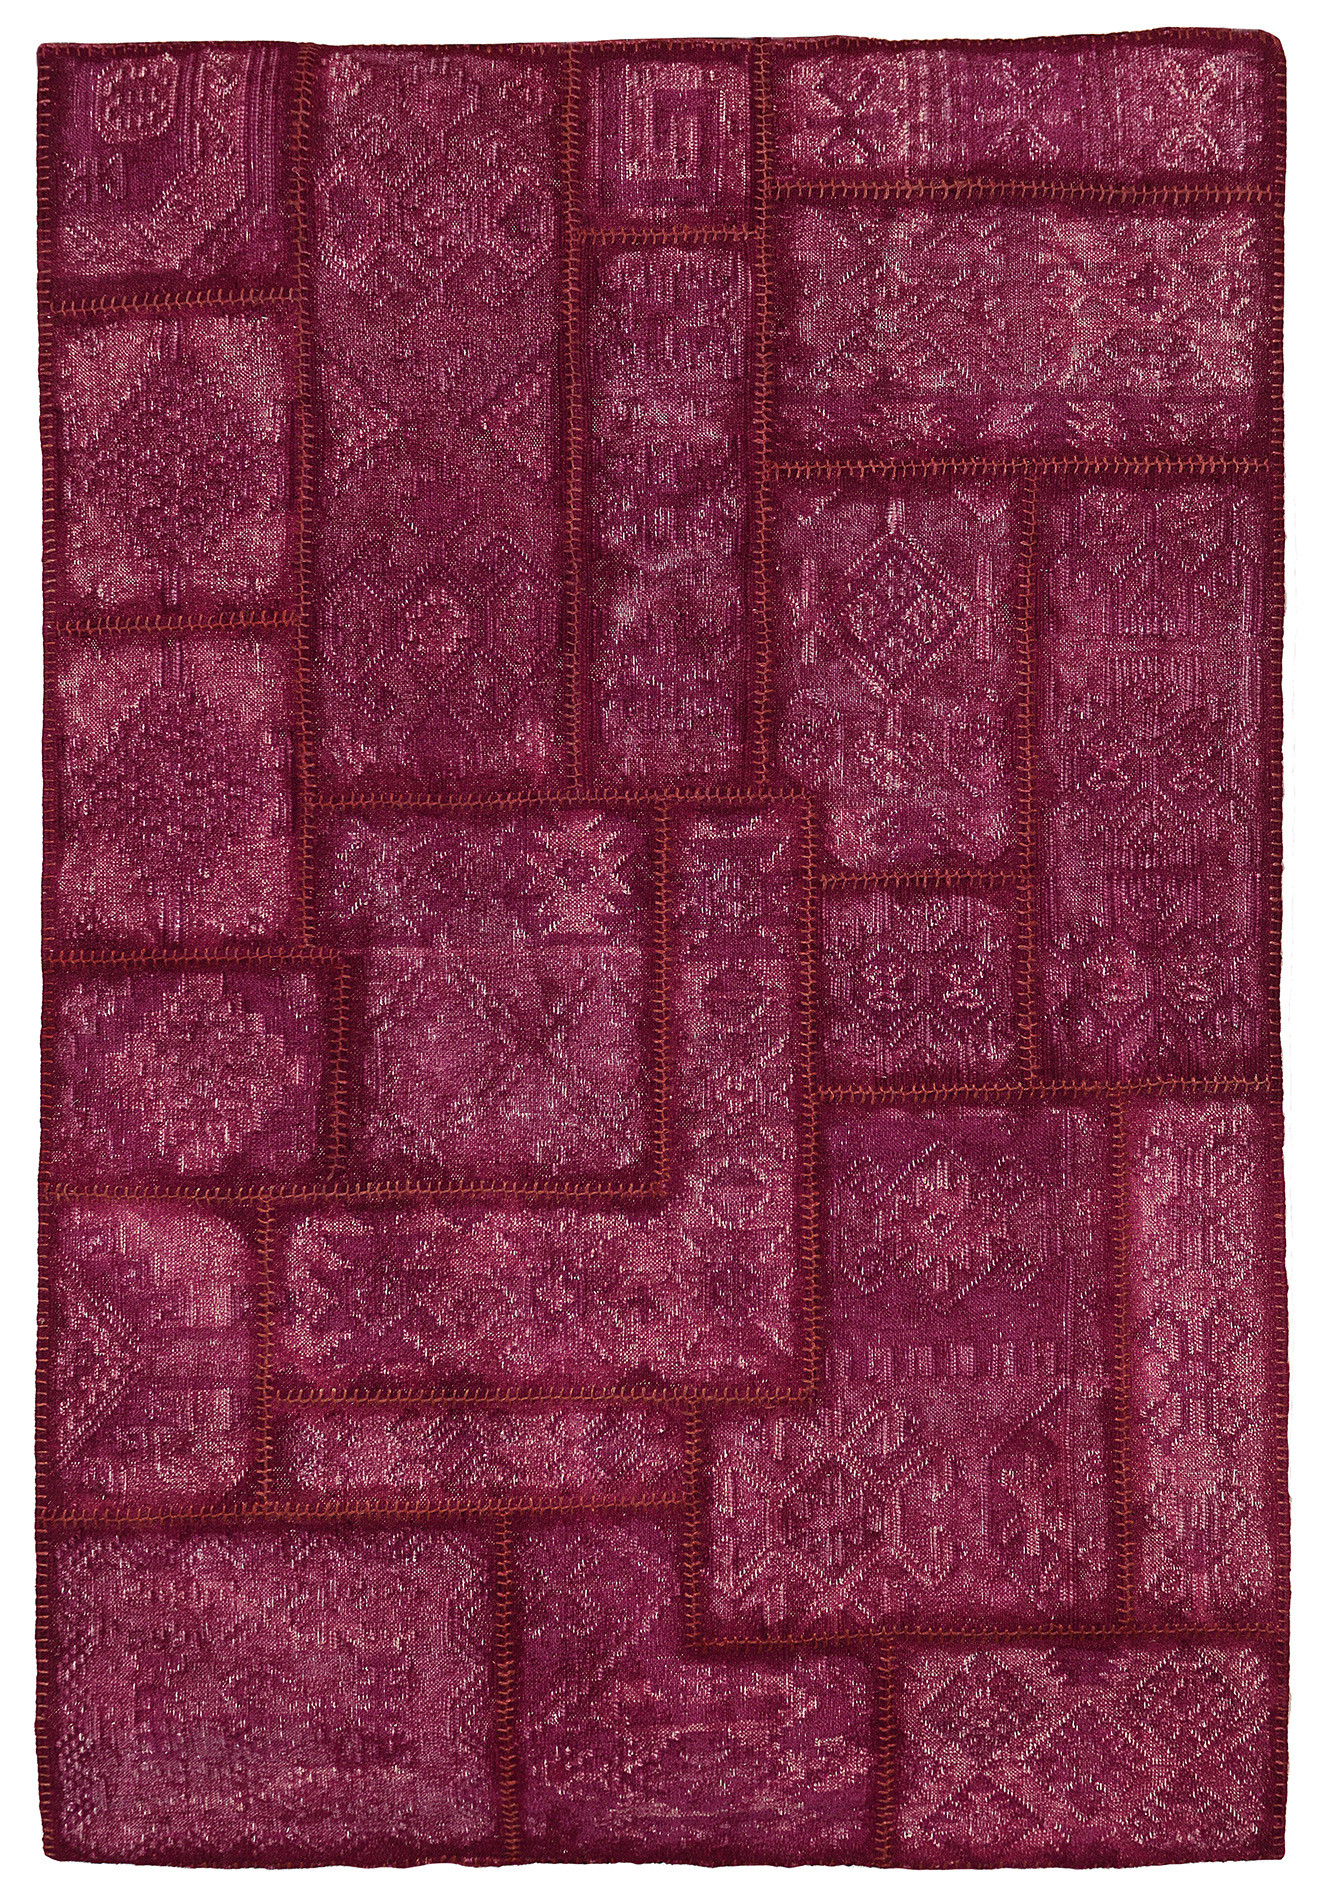 Kosas Home  Annabelle Kilim Berry Patchwork Indoor/Outdoor Area Rug; 8' x 10'